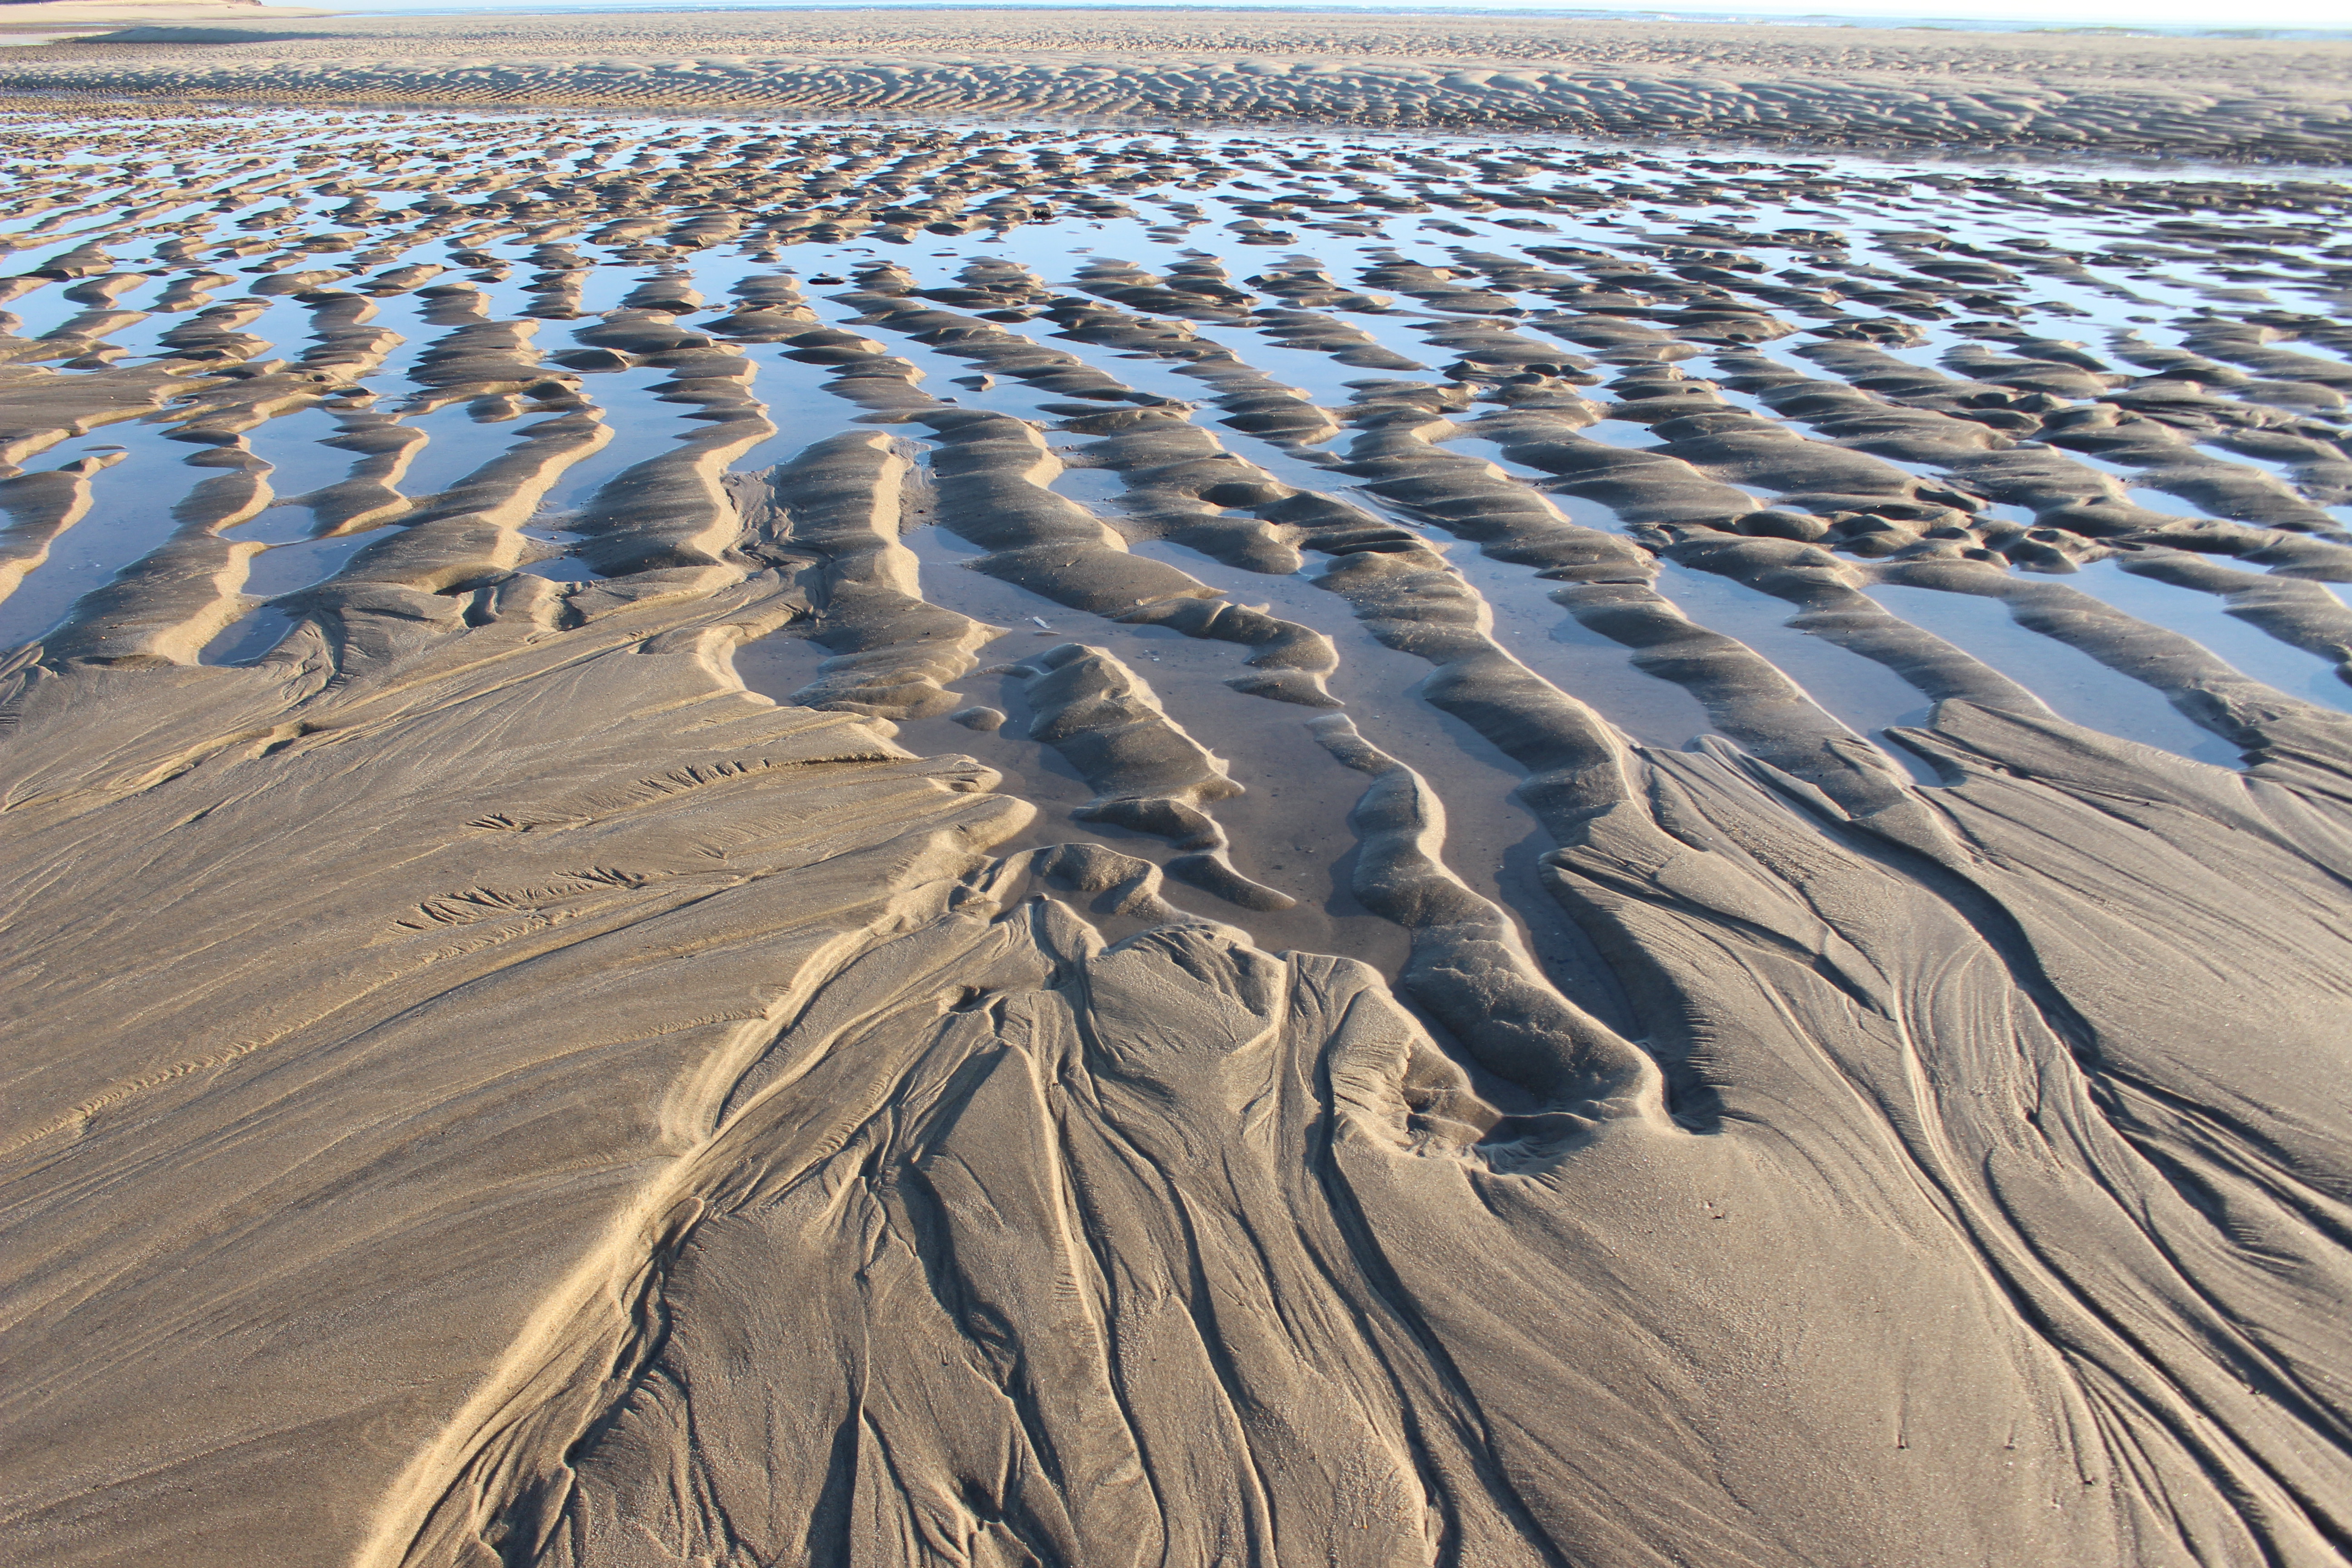 Low tide exposes rippled ridges of sand and water.